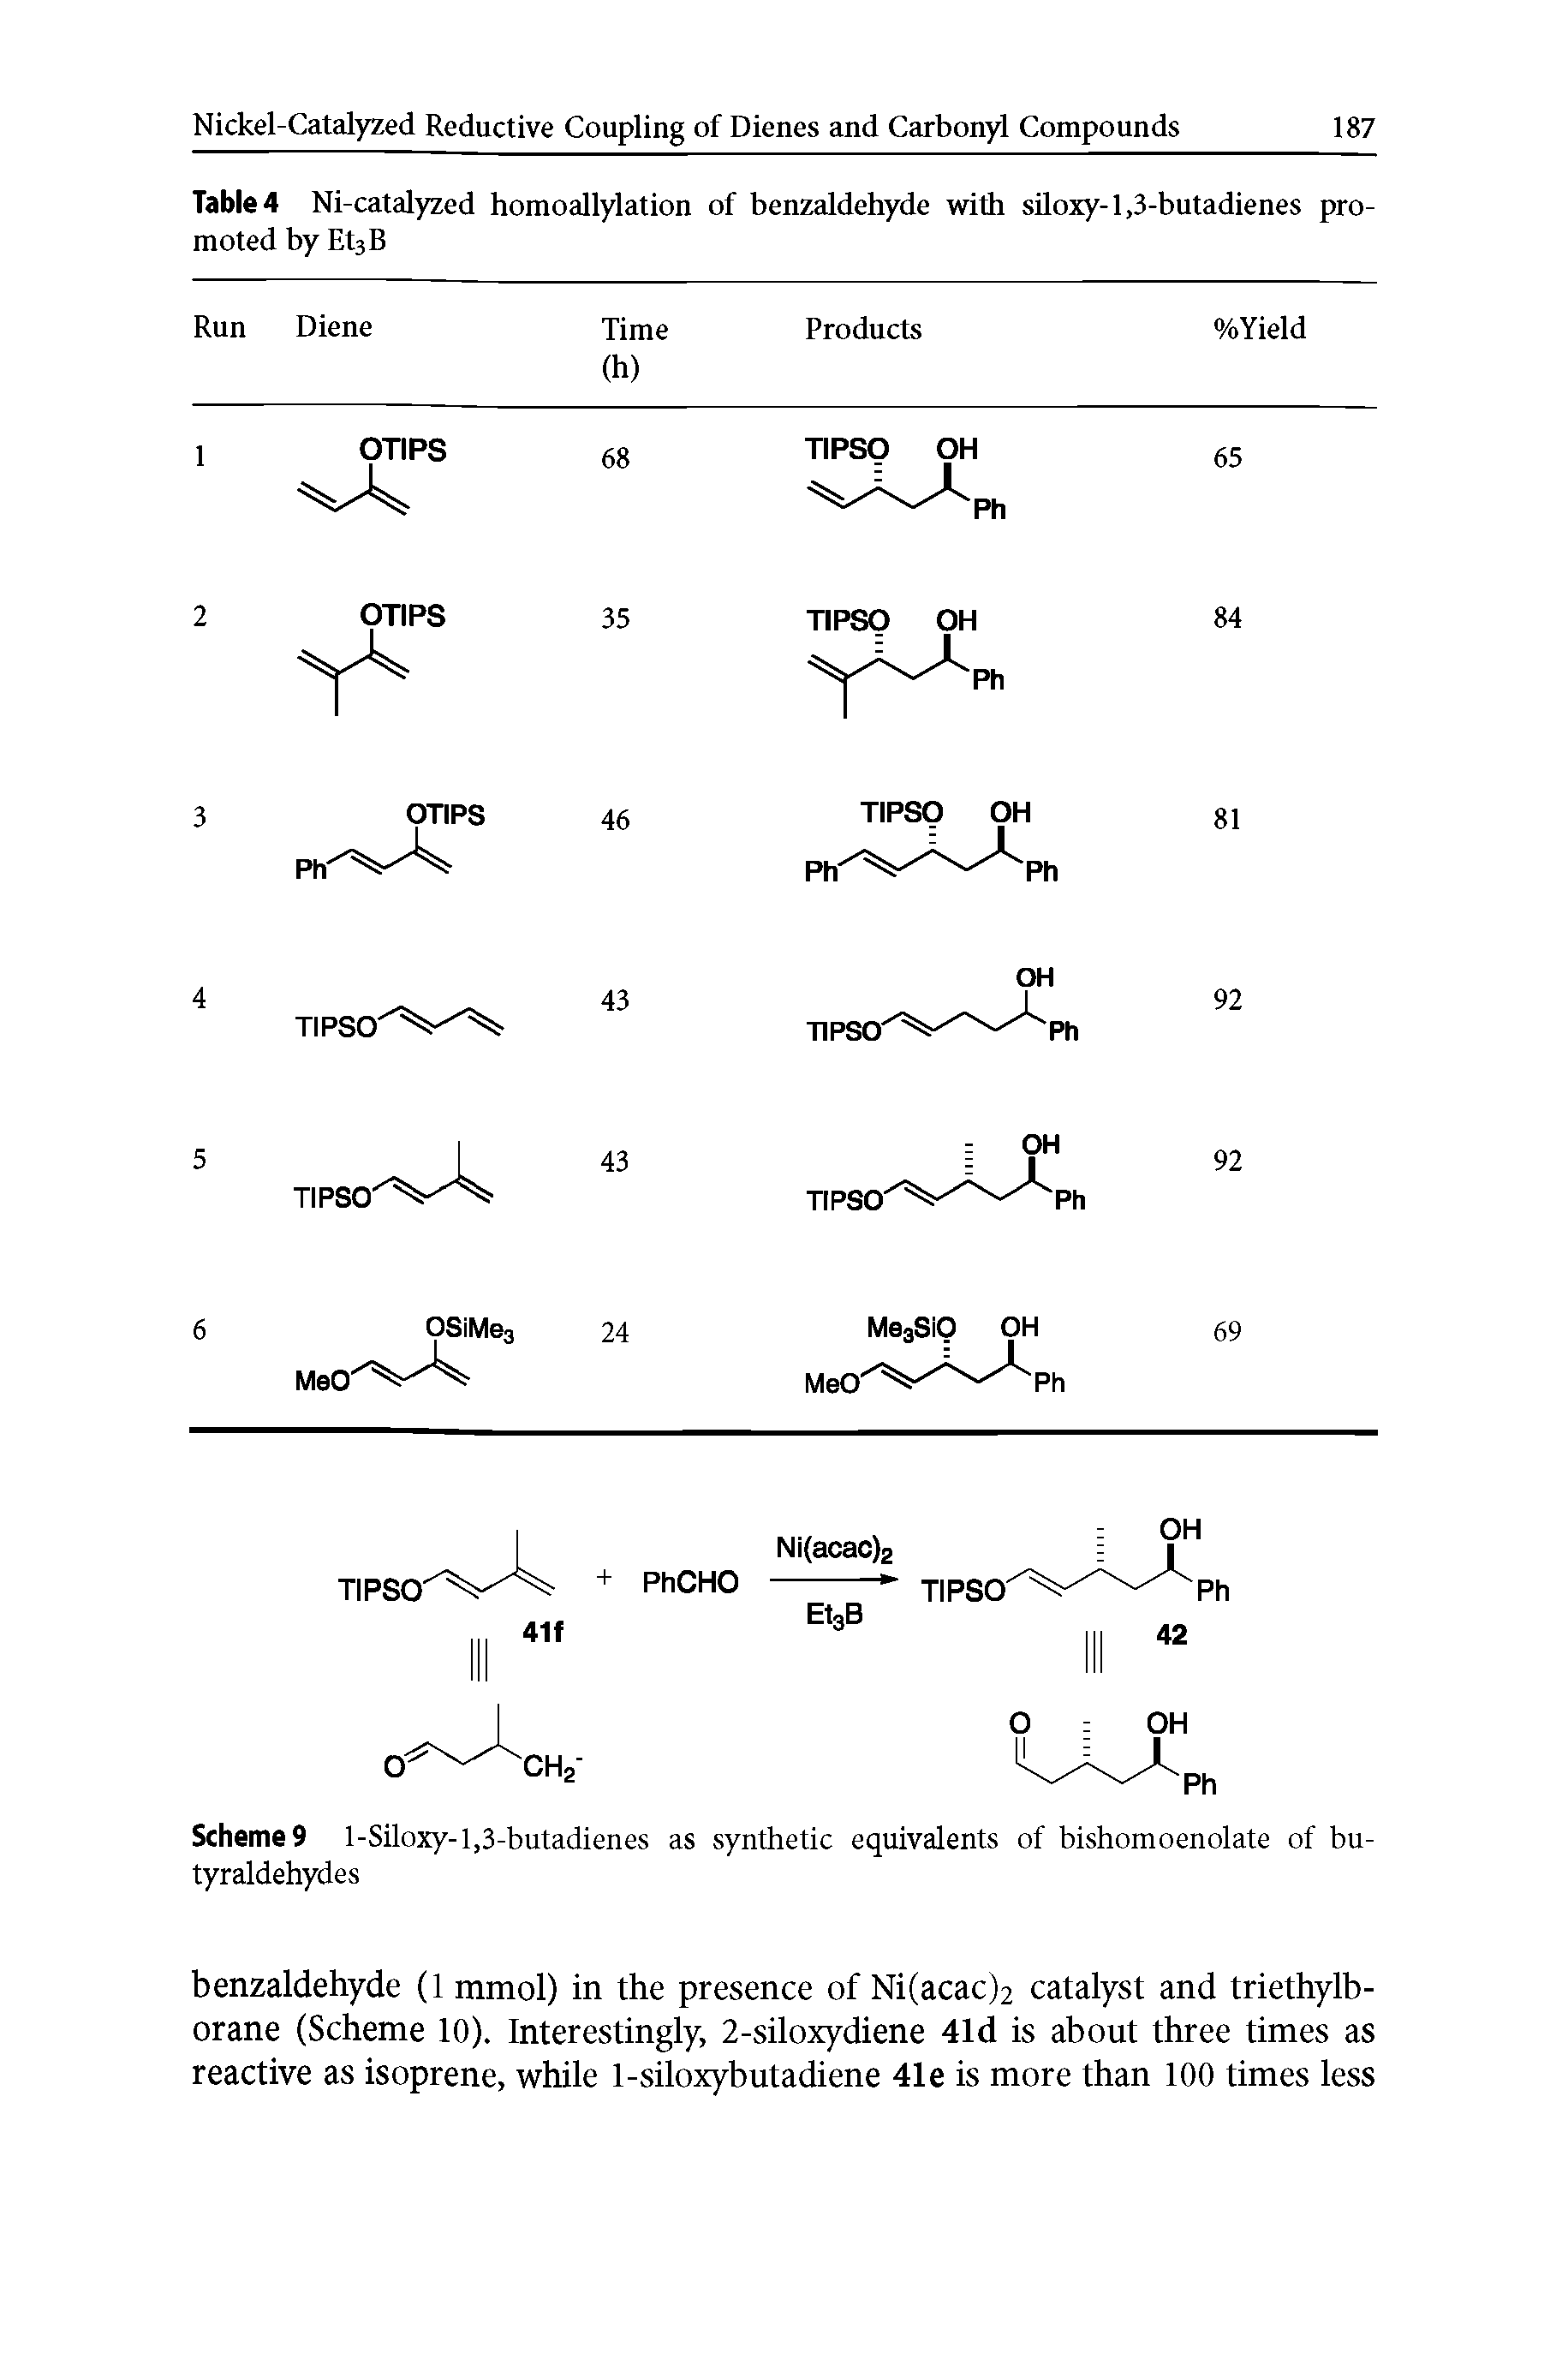 Table 4 Ni-catalyzed homoallylation of benzaldehyde with siloxy-1,3-butadienes promoted by Et3B...